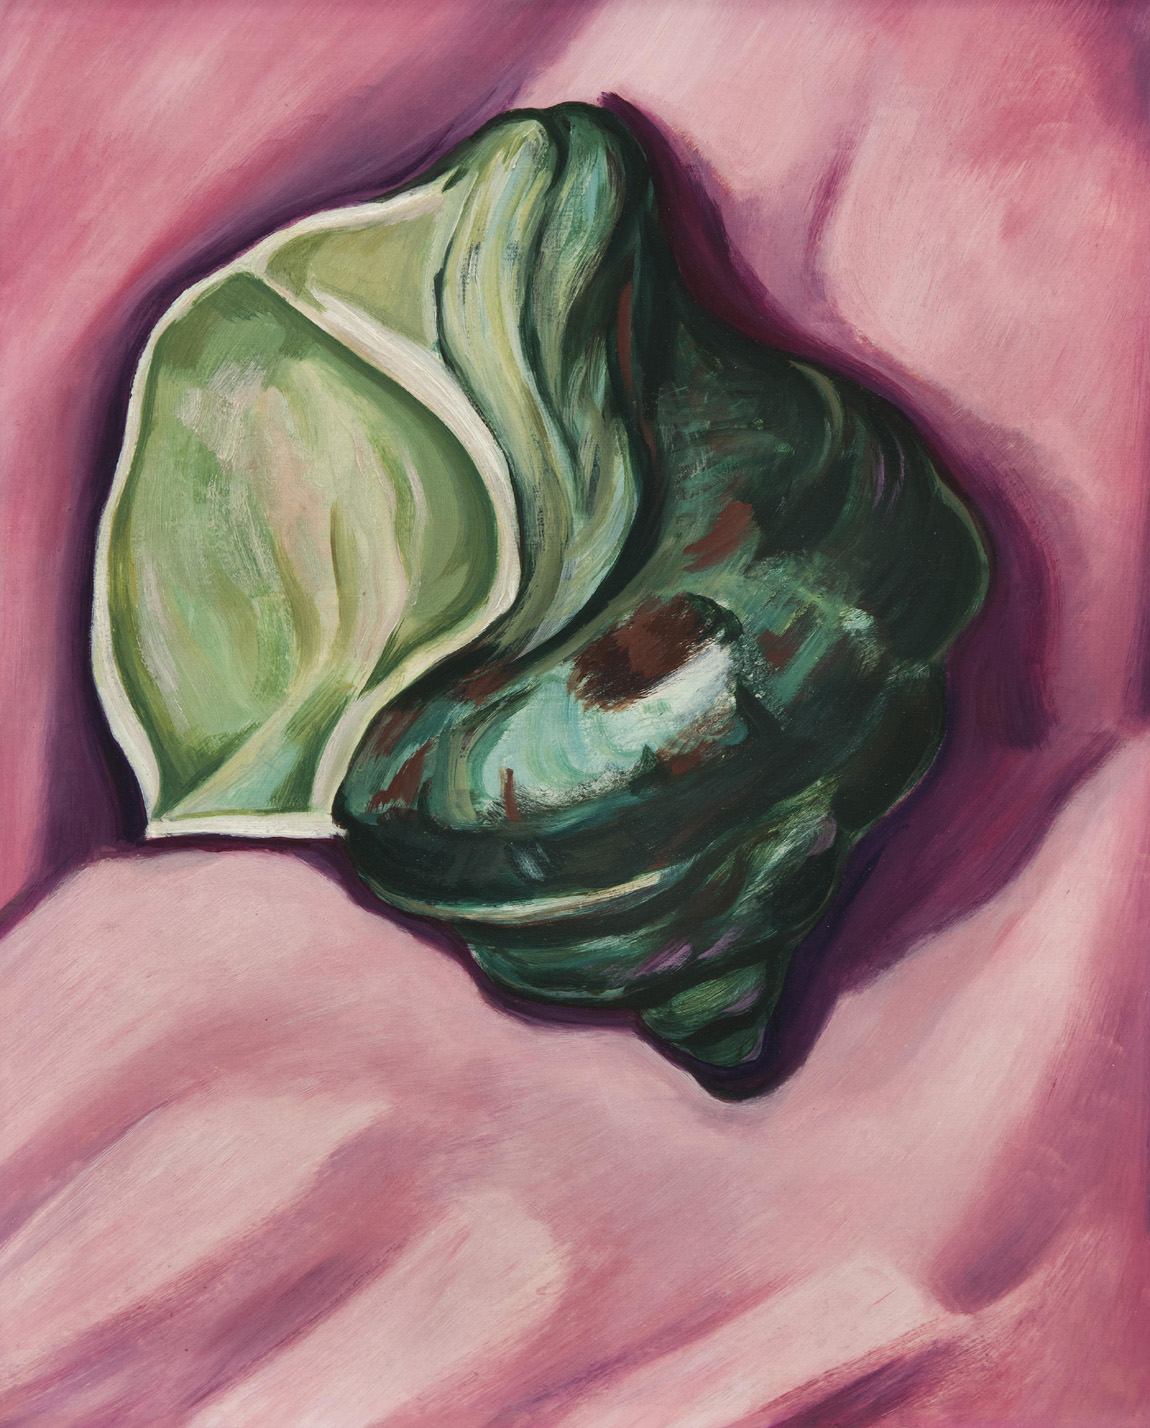 Jonathan Boos, New York City, displayed this 1929 oil painting by Marsden Hartley, “The Seashell.” Image courtesy of the gallery.